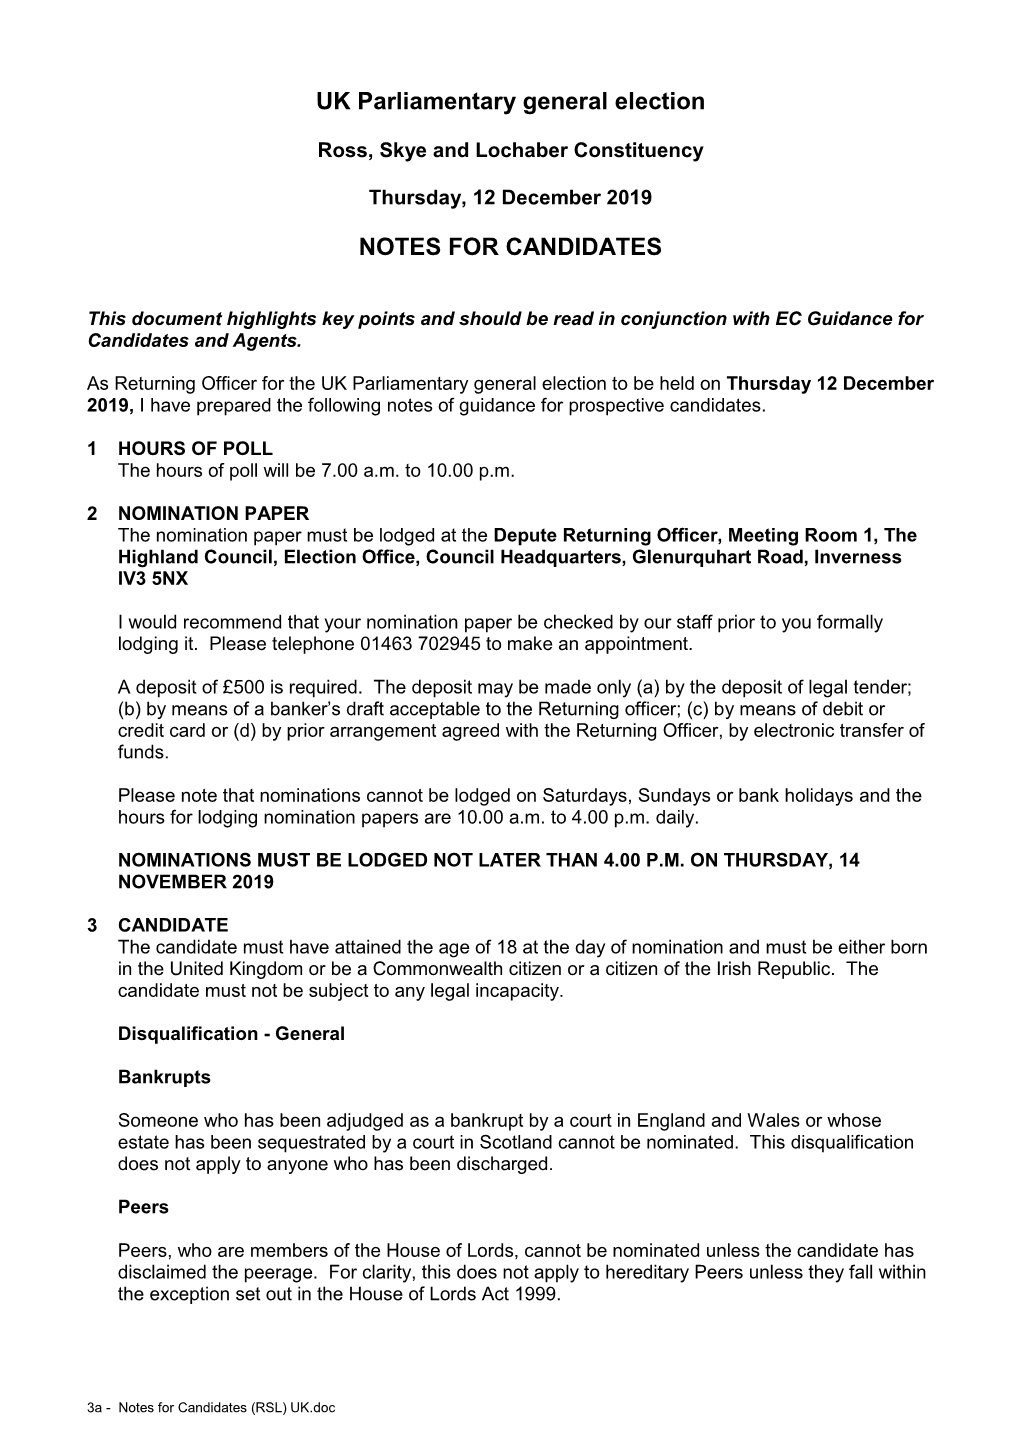 UK Parliamentary General Election NOTES for CANDIDATES